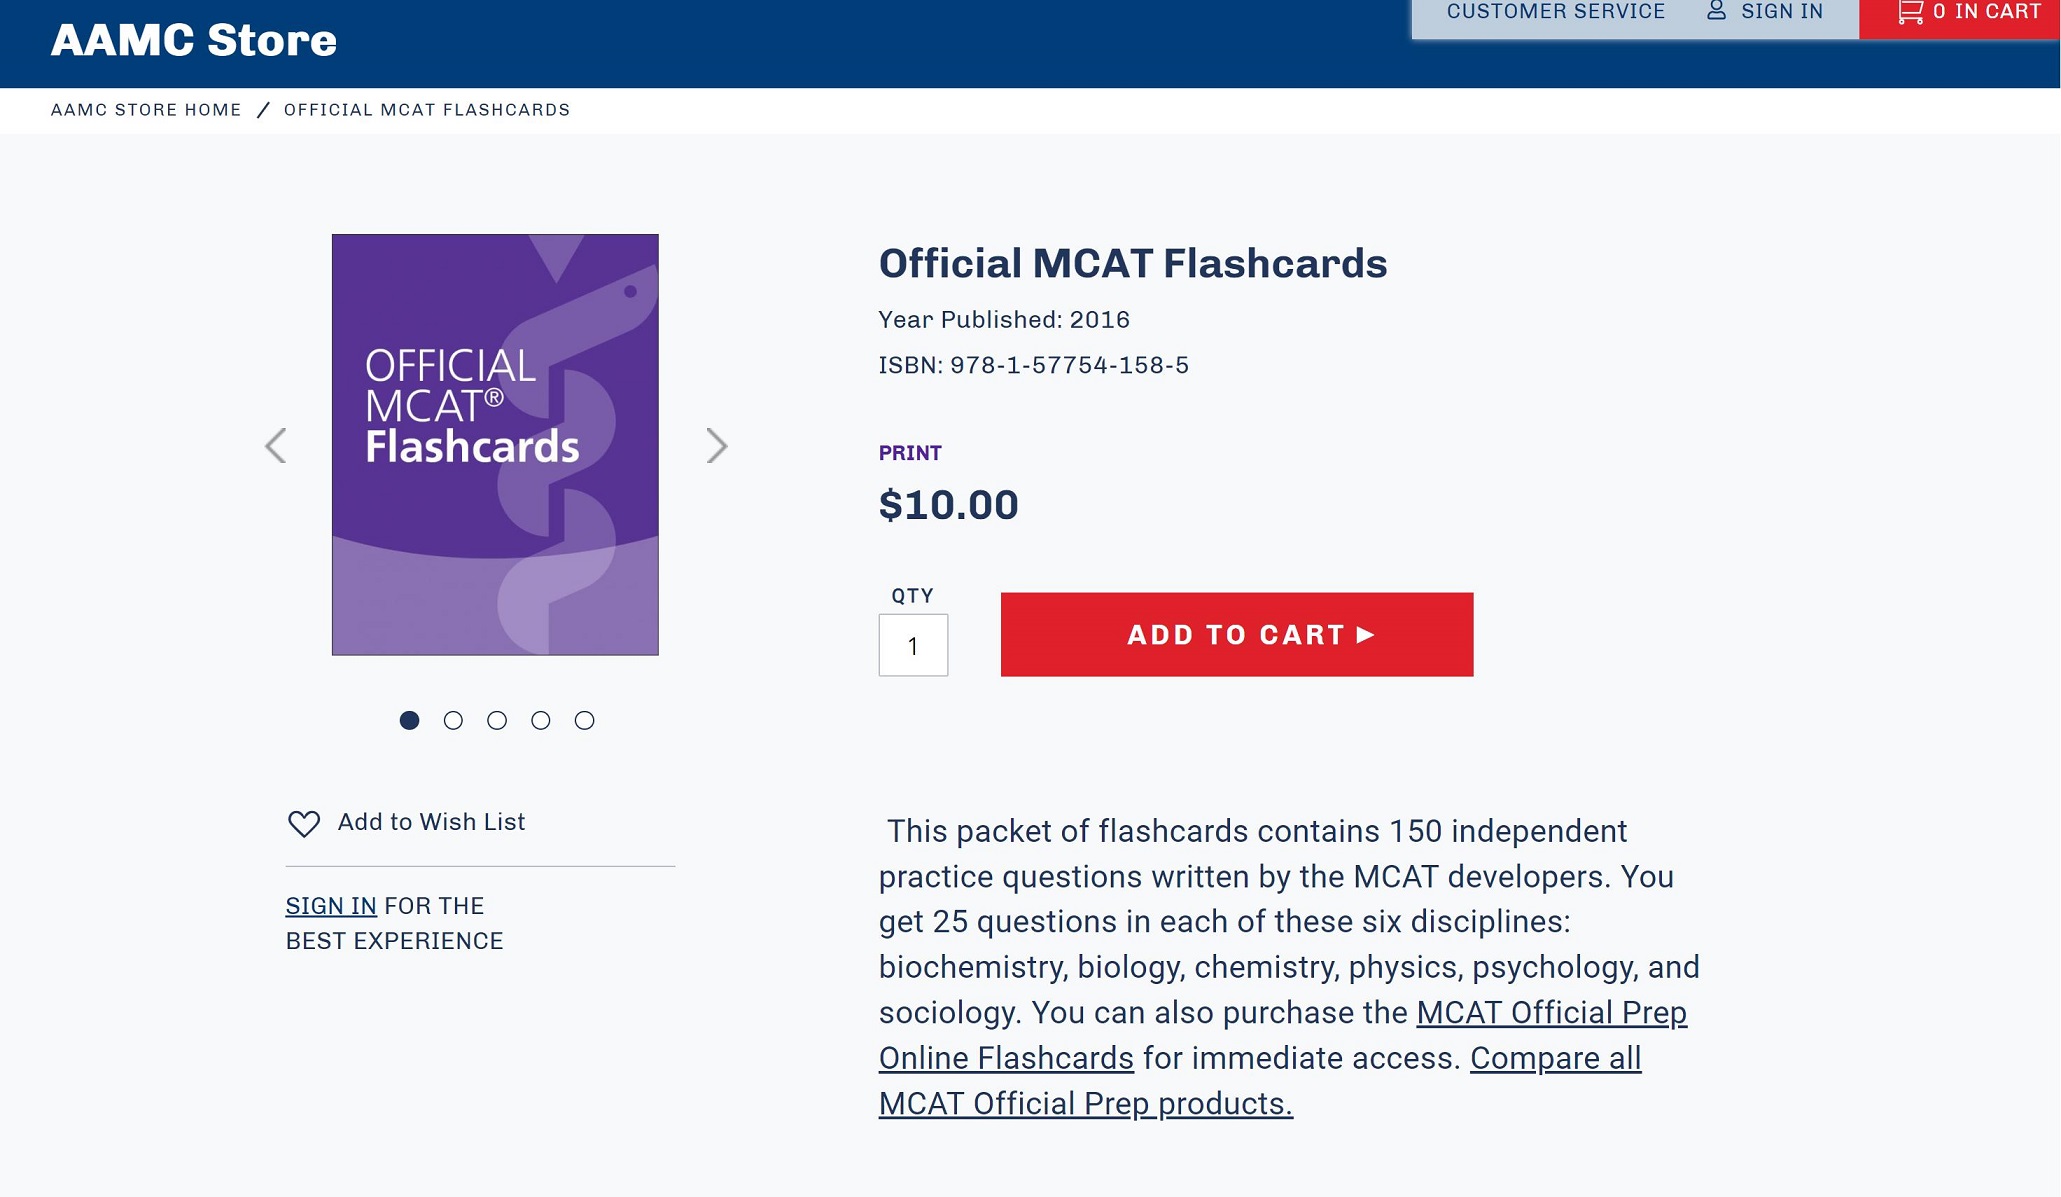 AAMC MCAT Official Flashcards